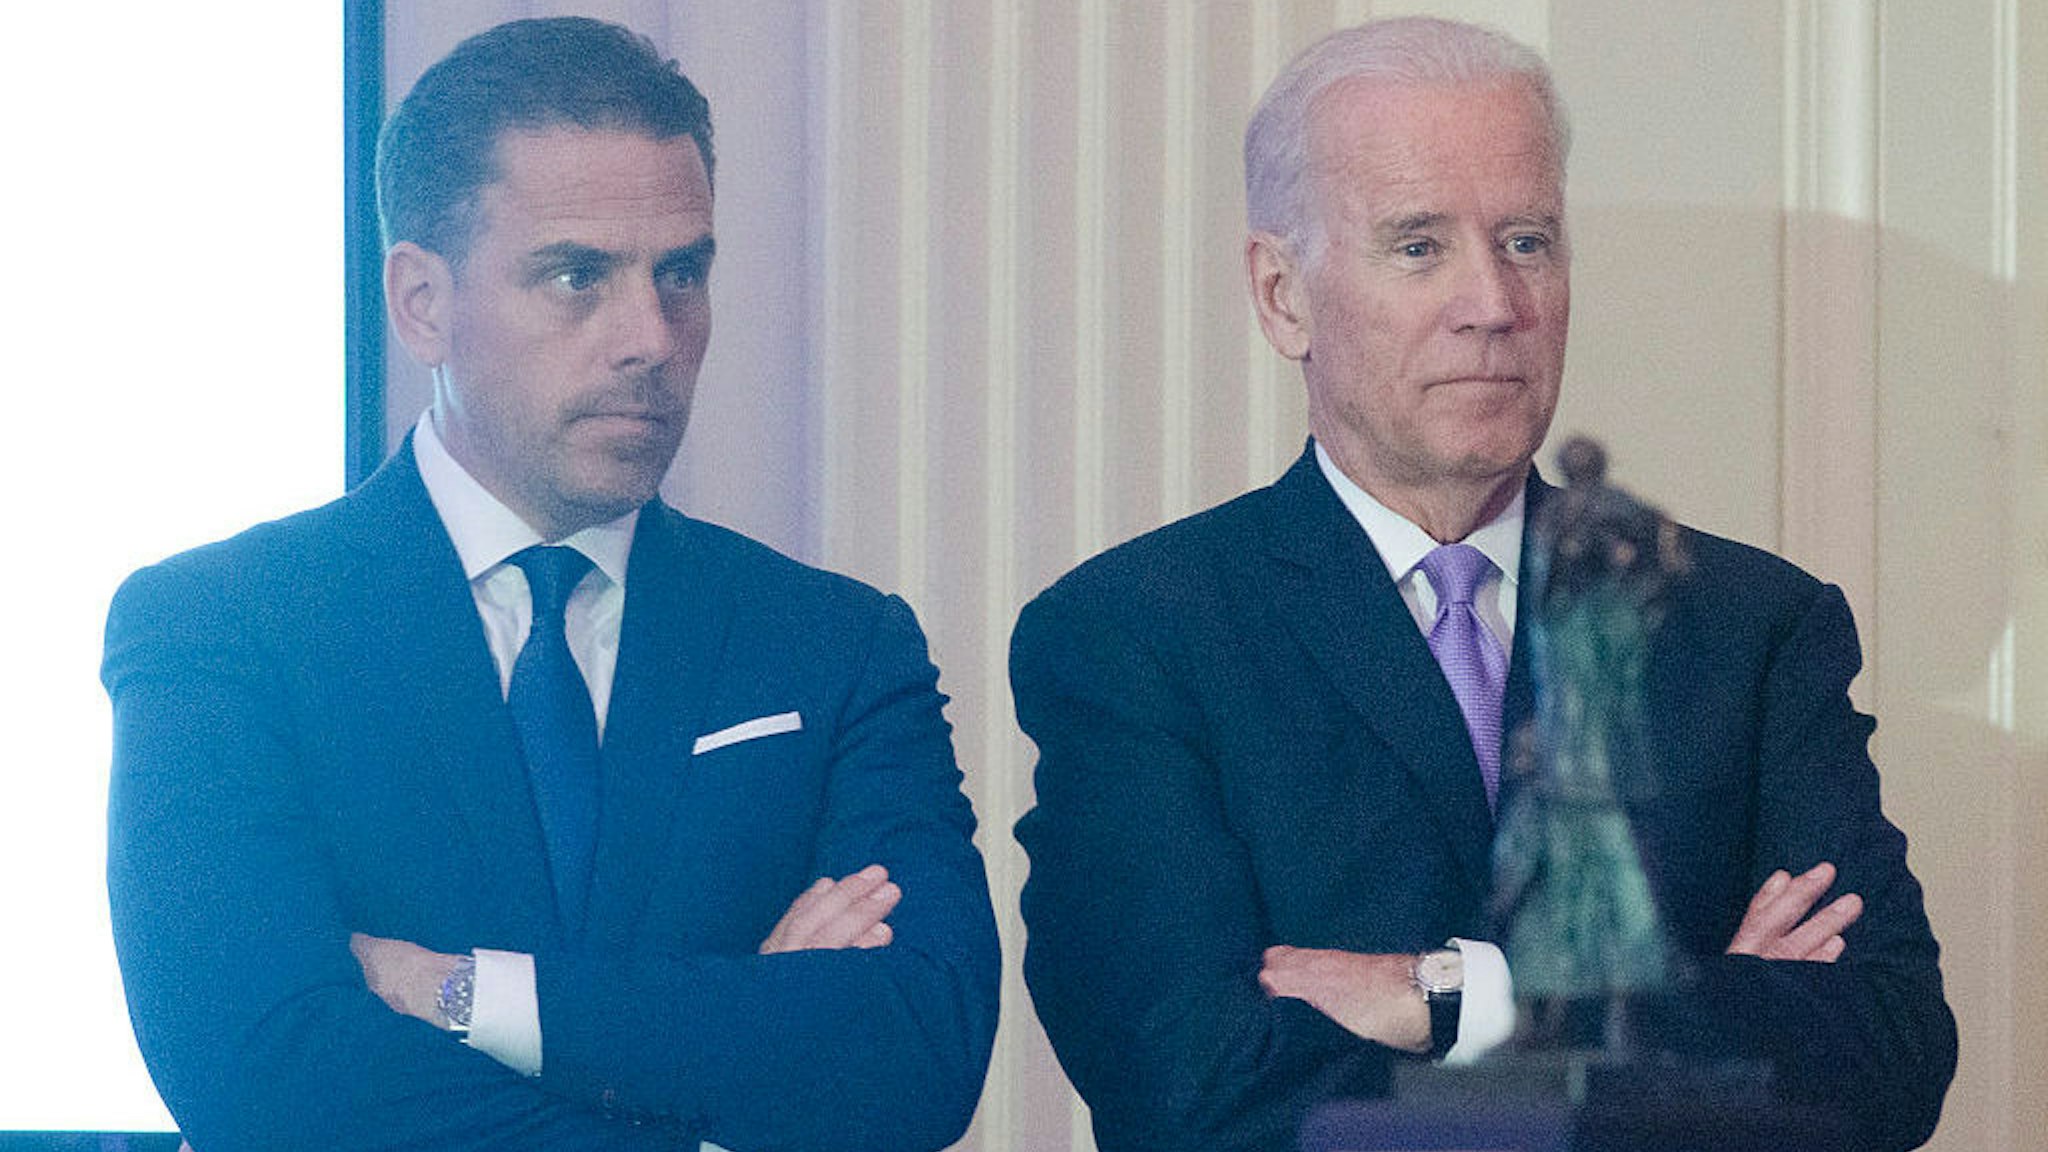 WASHINGTON, DC - APRIL 12: WFP USA Board Chair Hunter Biden introduces his father Vice President Joe Biden during the World Food Program USA's 2016 McGovern-Dole Leadership Award Ceremony at the Organization of American States on April 12, 2016 in Washington, DC. (Kris Connor/WireImage)